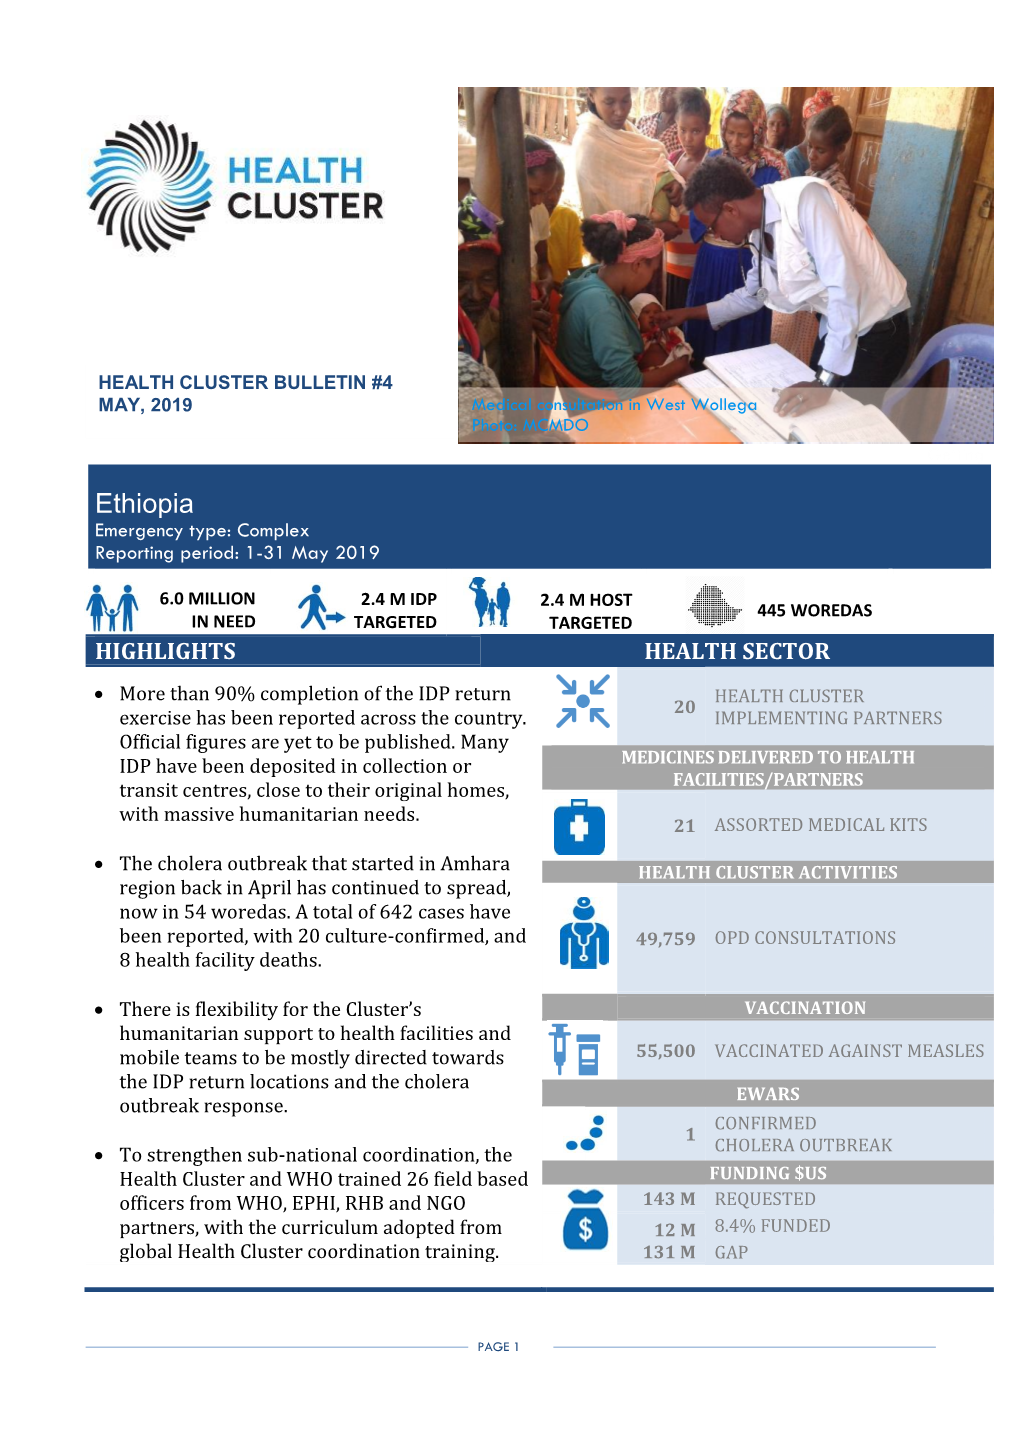 Ethiopia Emergency Type: Complex Reporting Period: 1-31 May 2019